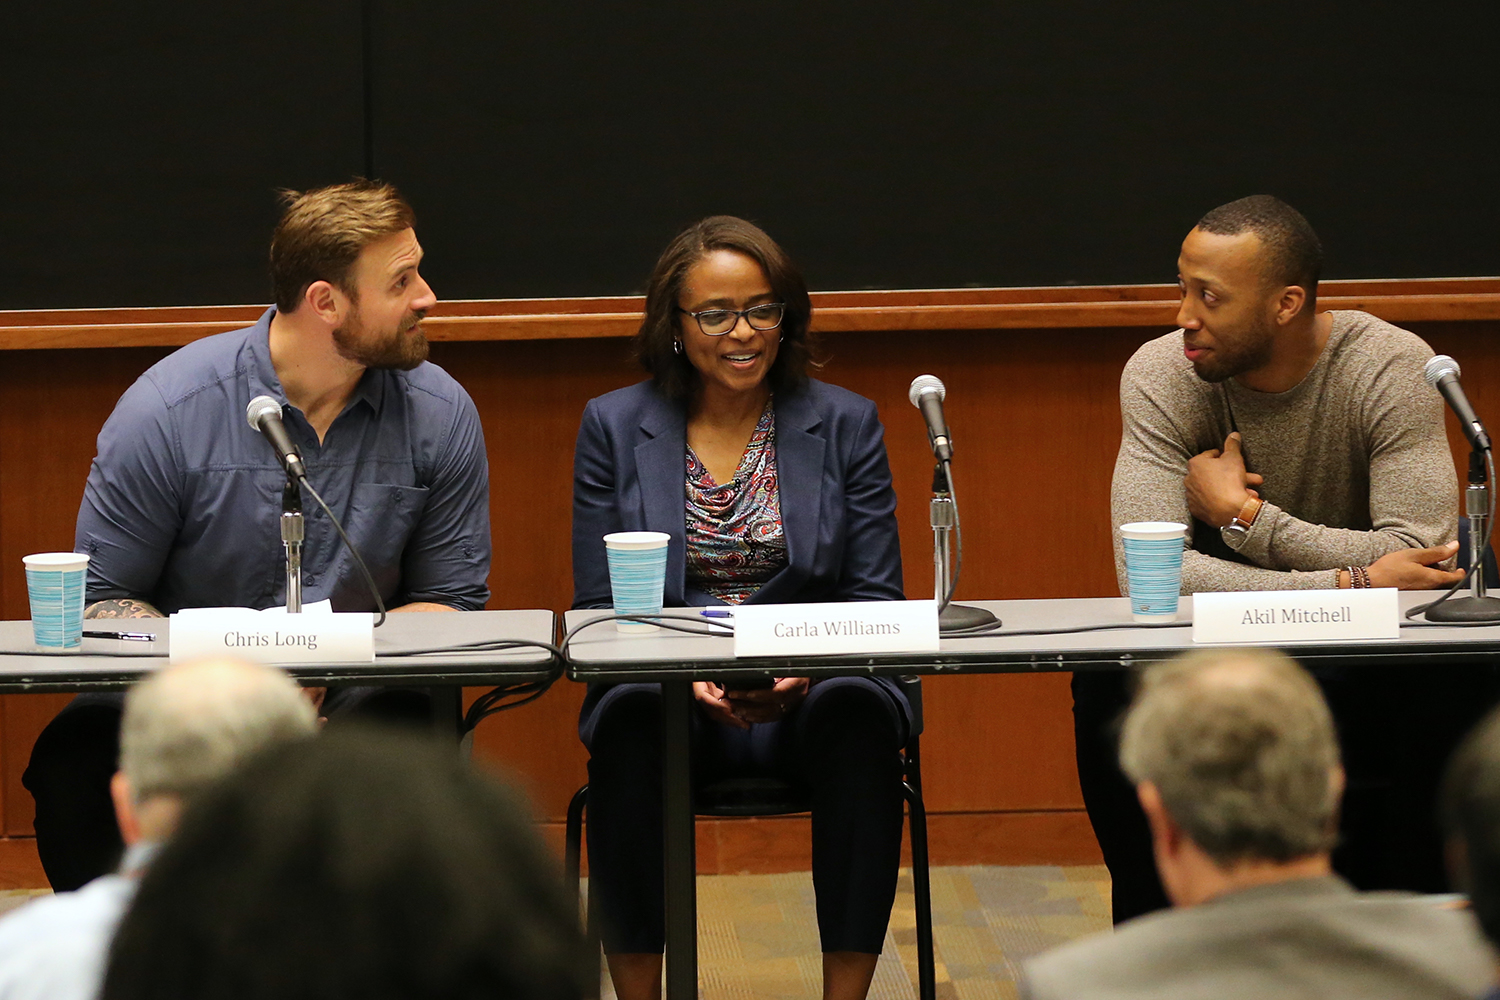 Chris Long,  Carla Williams and Akil Mitchell talk during a panel discussion